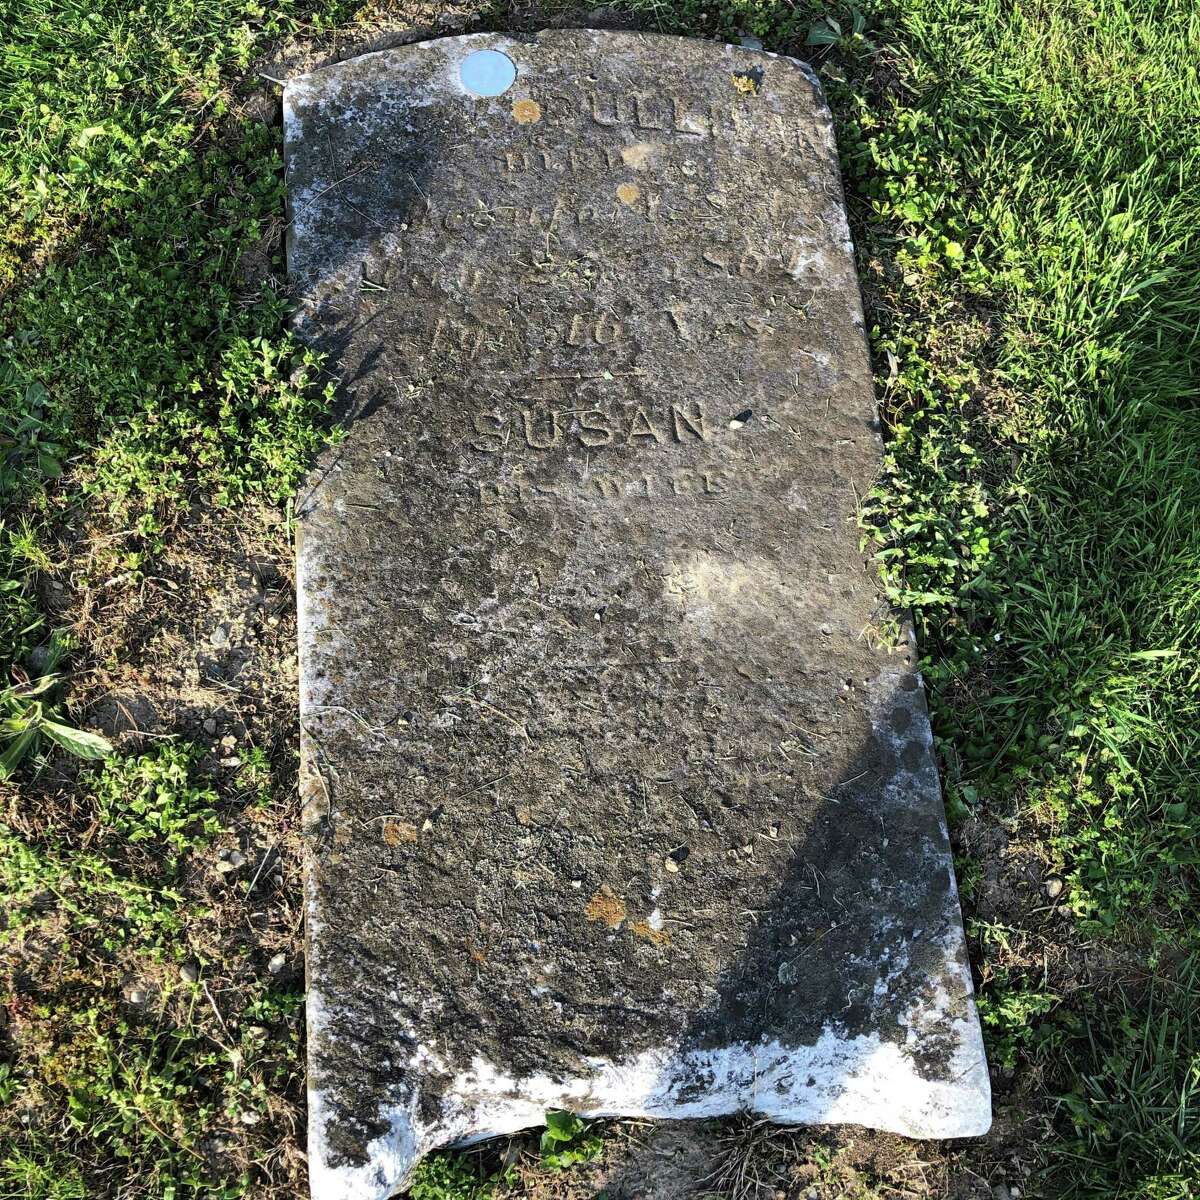 A headstone in the cemetery that Sharon Pearson believes could be the gravesite of a former enslaved person.